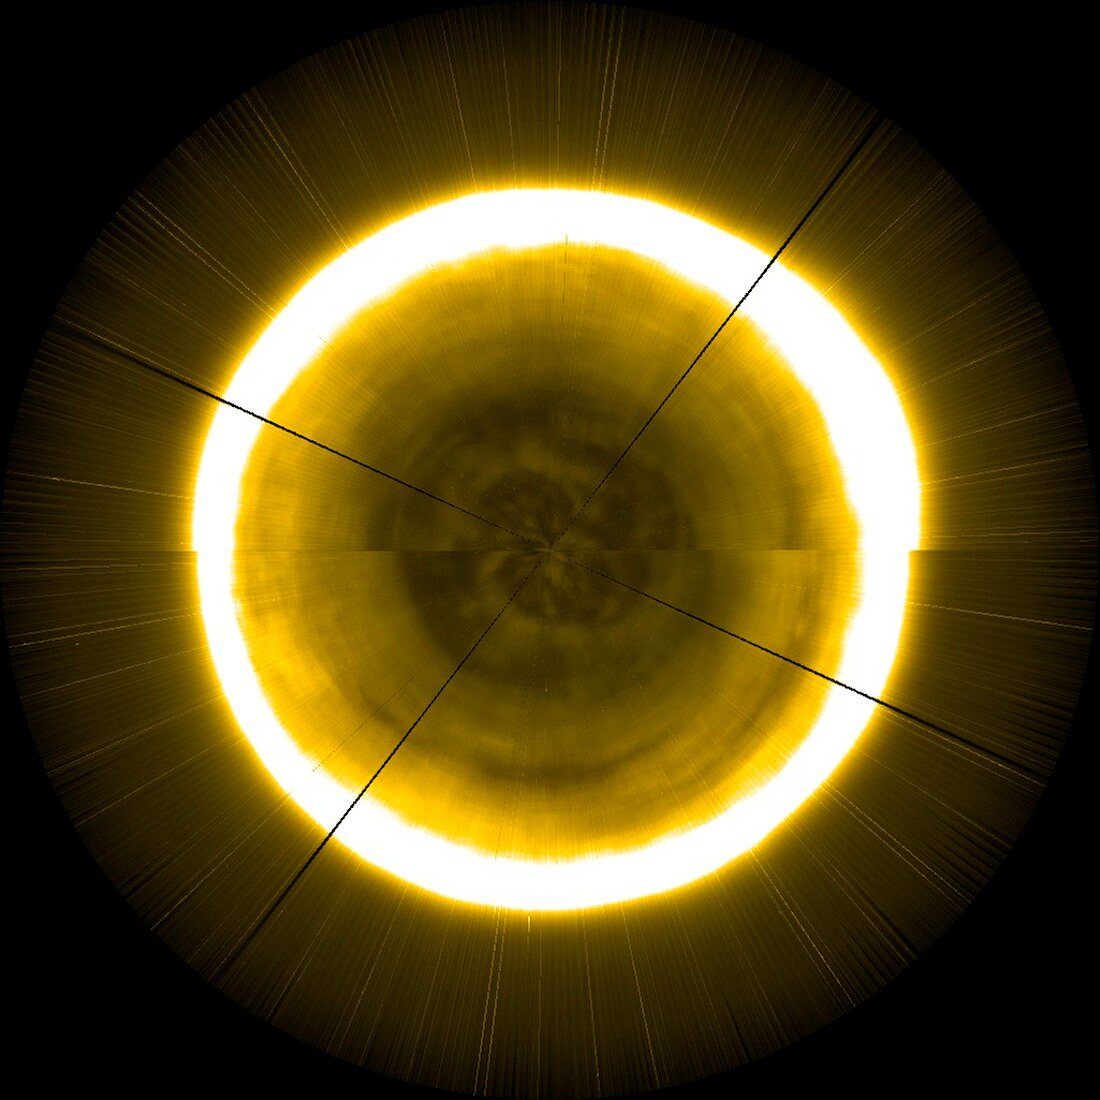 Sun's north pole, view constructed from PROBA-2 data